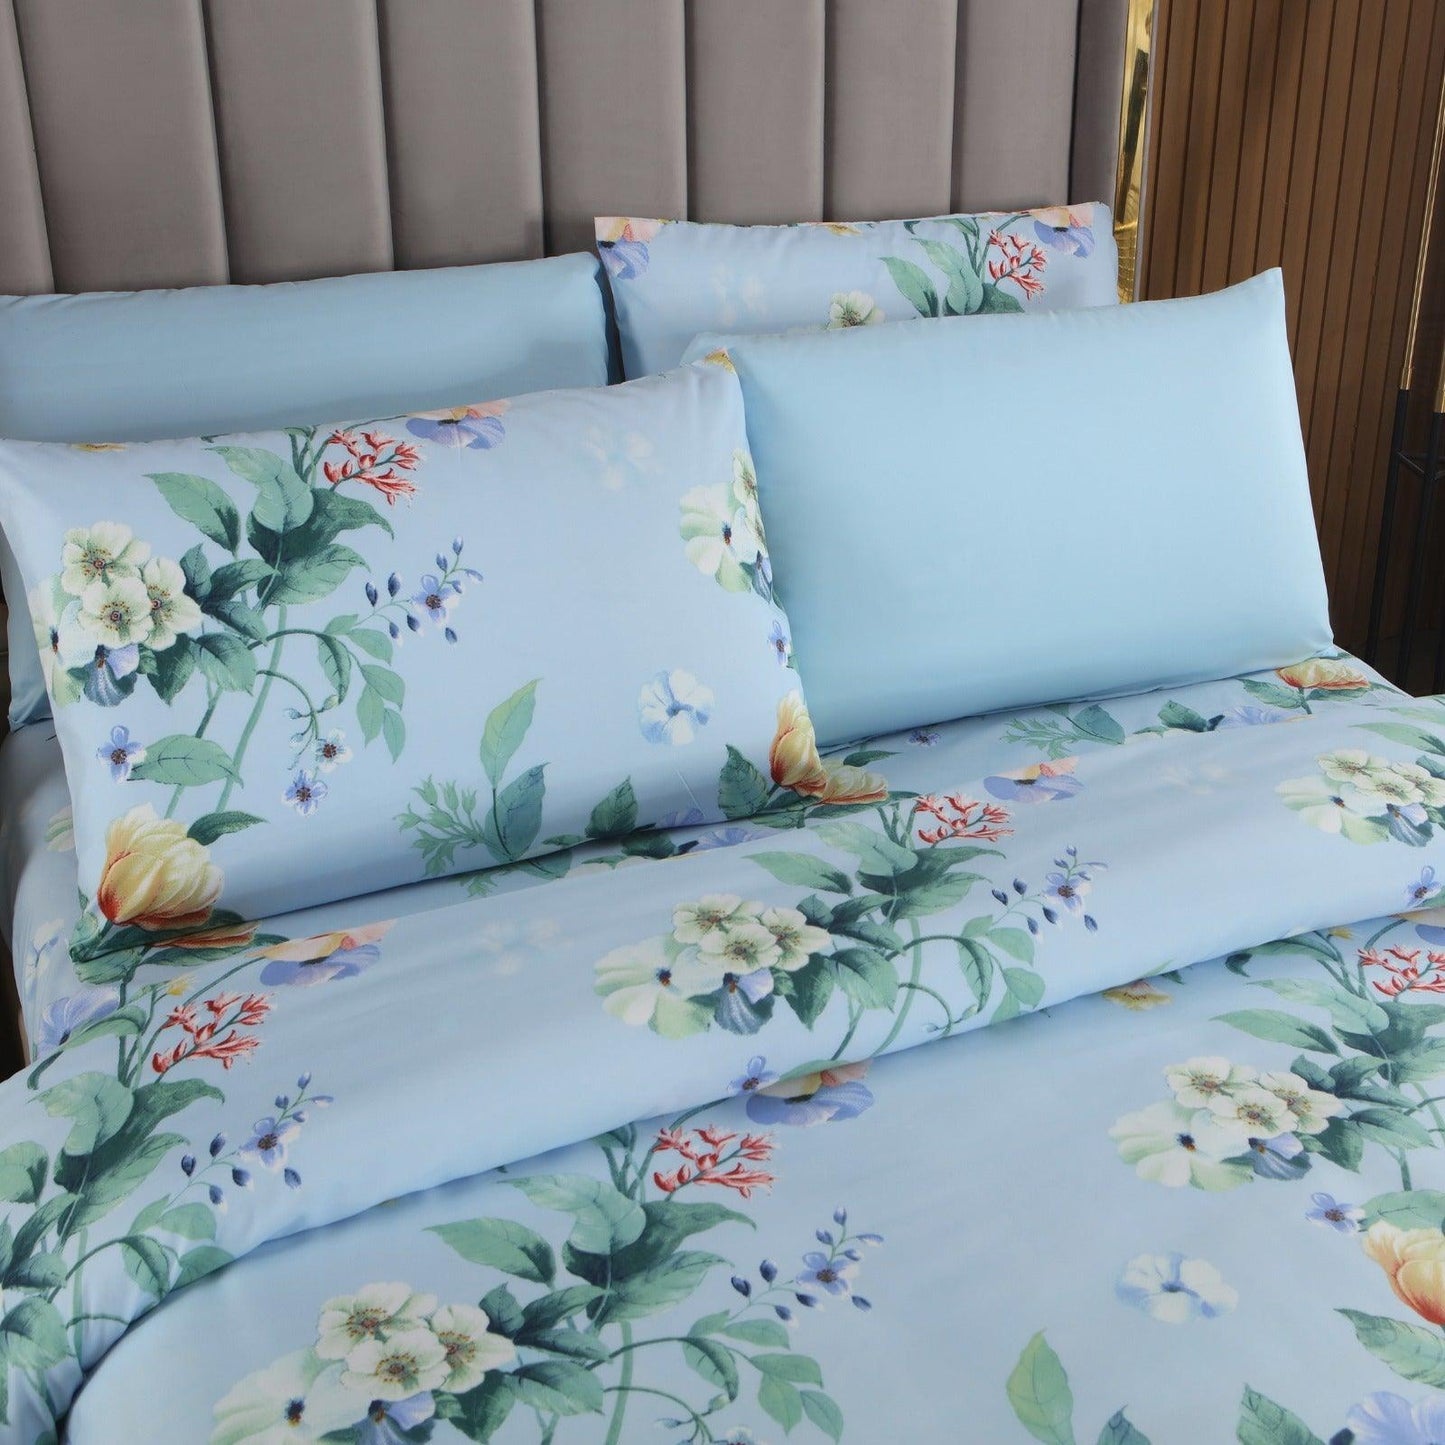 Experience Luxurious Comfort: Pearl Bay's 6 Piece Bed Sheet Set (12 Styles)